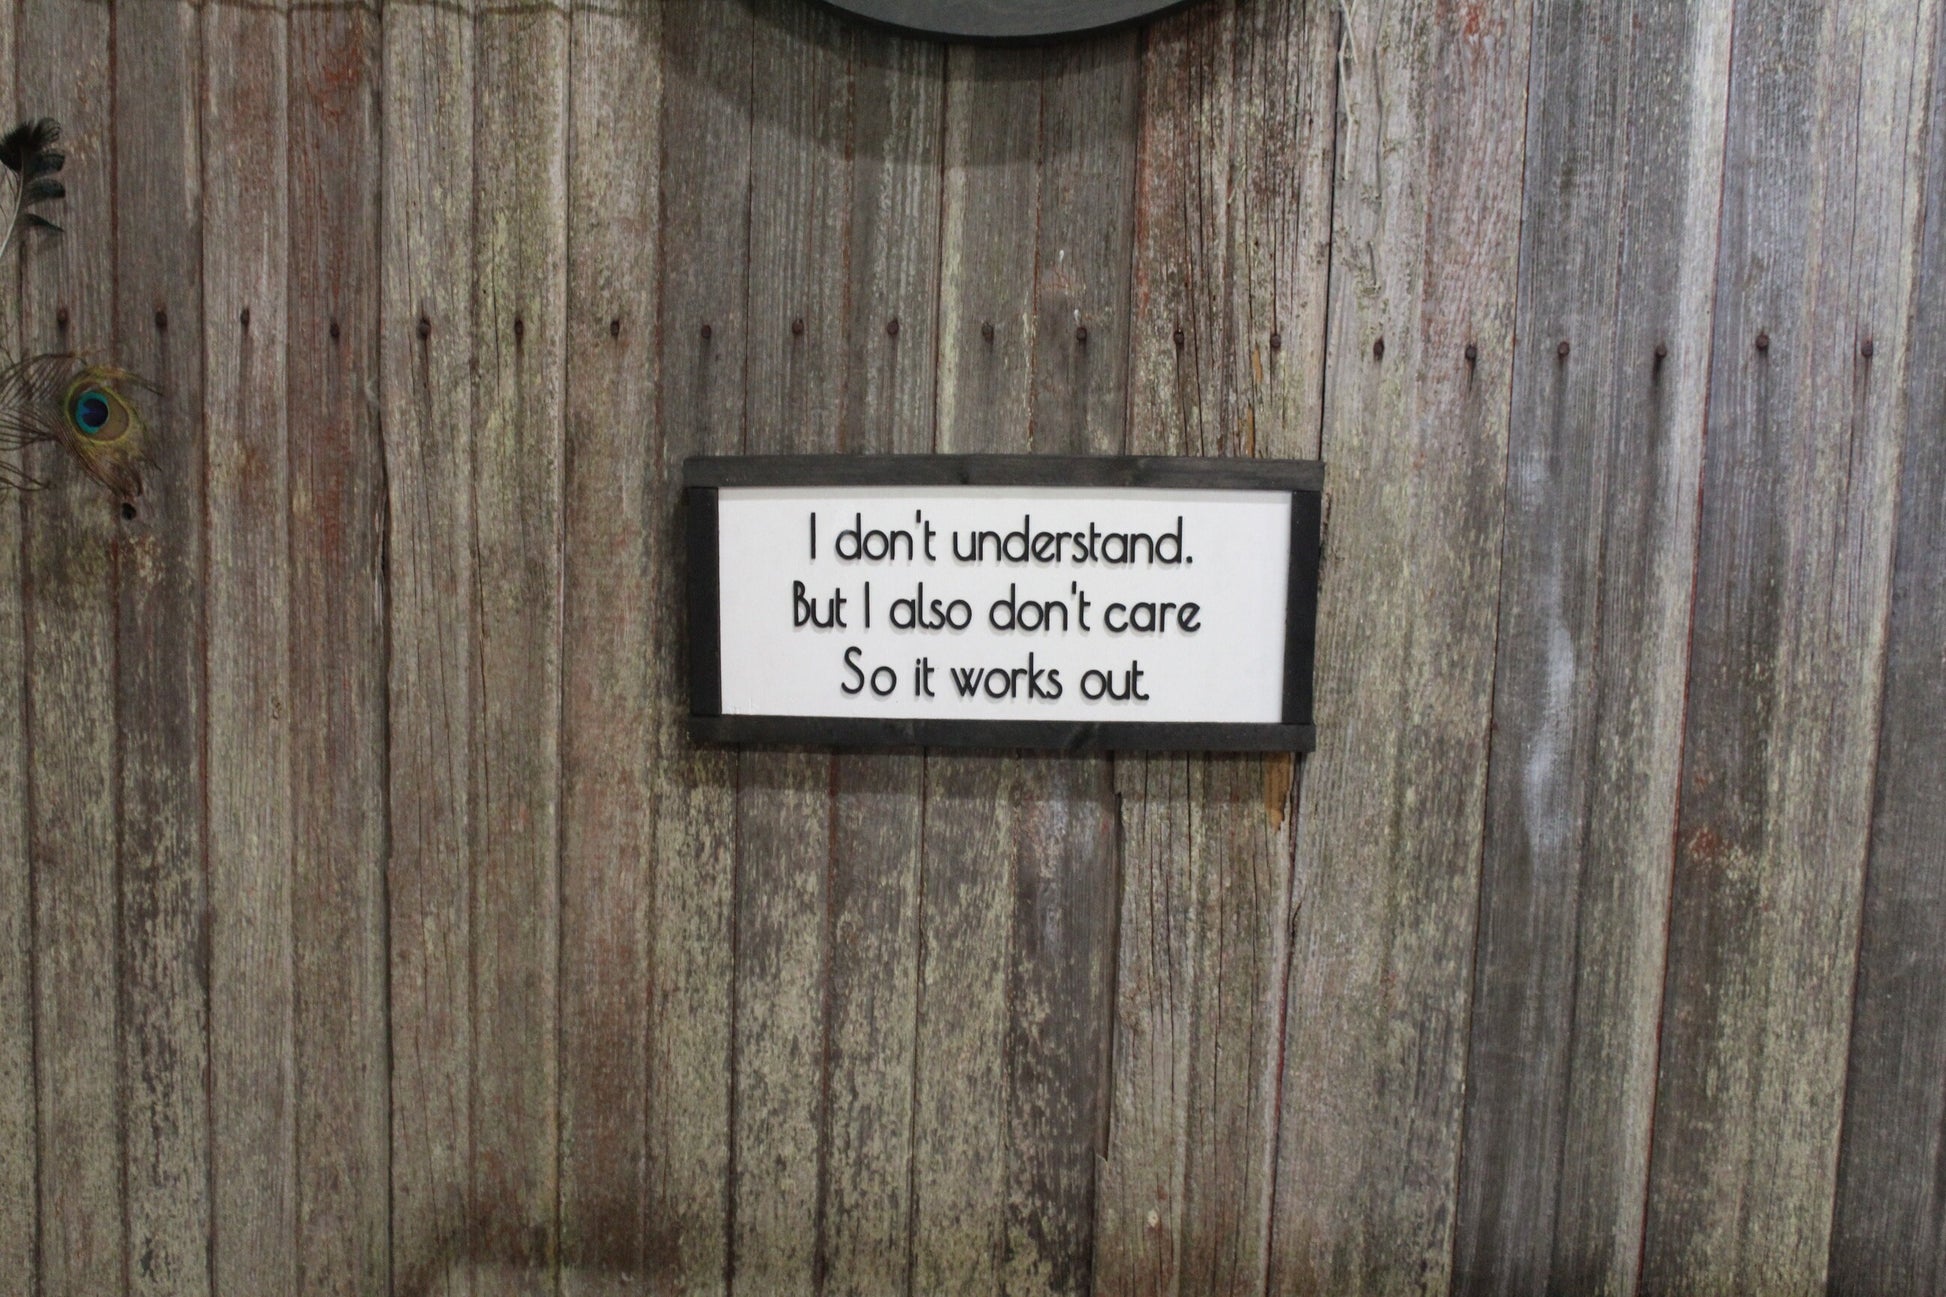 Sarcasm Wood Sign I Don't Understand But I Also Don't Care Snarky Raised Text Friend Gift Wise Guy Black White Framed Contemporary Silly